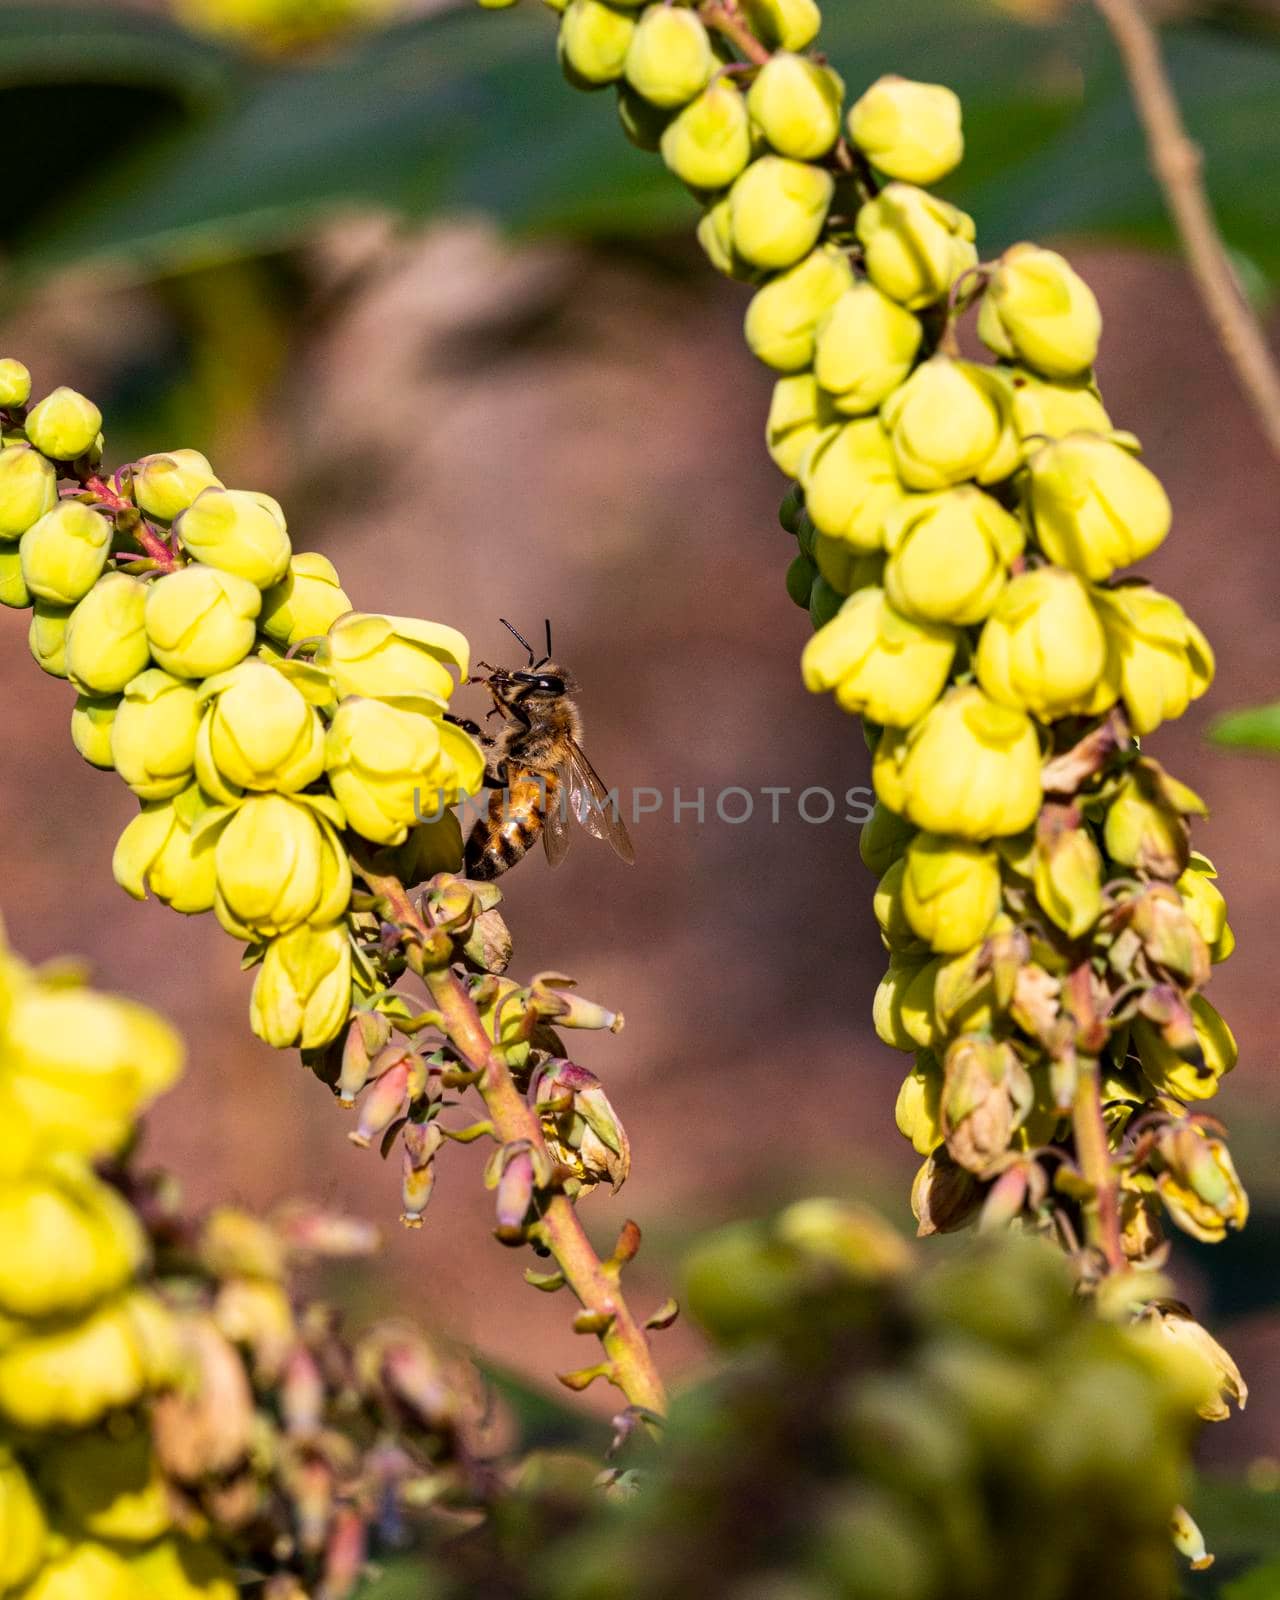 Bee on Mahonia Plant Flower by CharlieFloyd